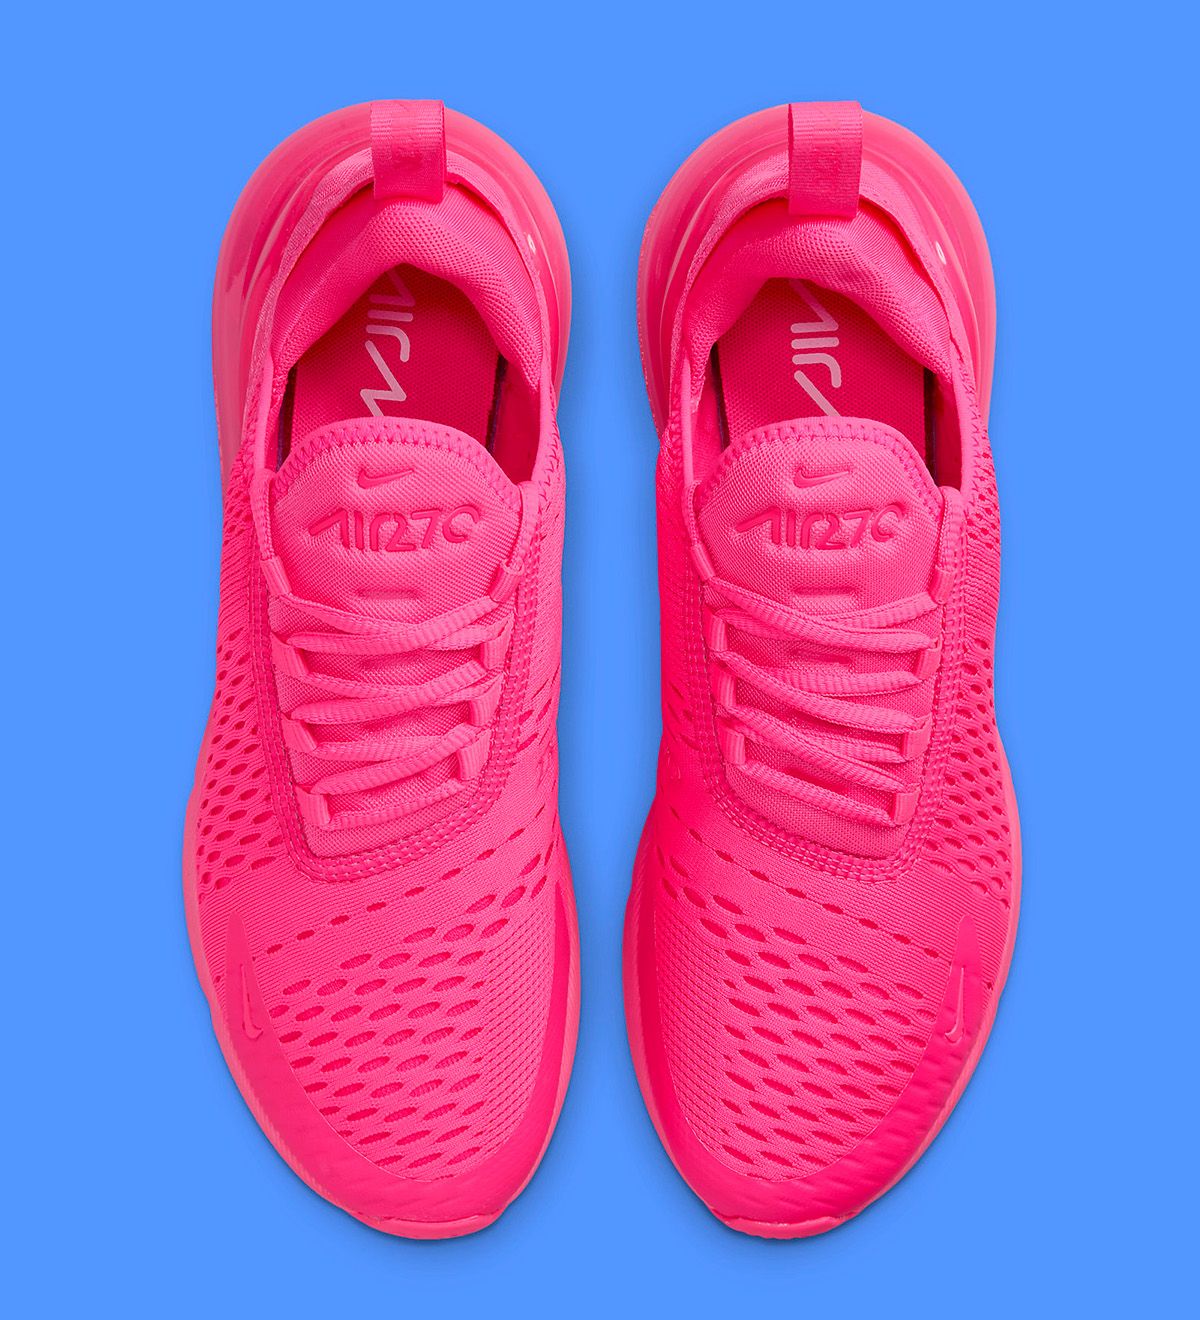 First pink 270 nike Looks // Nike Air Max 270 "Triple Pink" | HOUSE OF HEAT